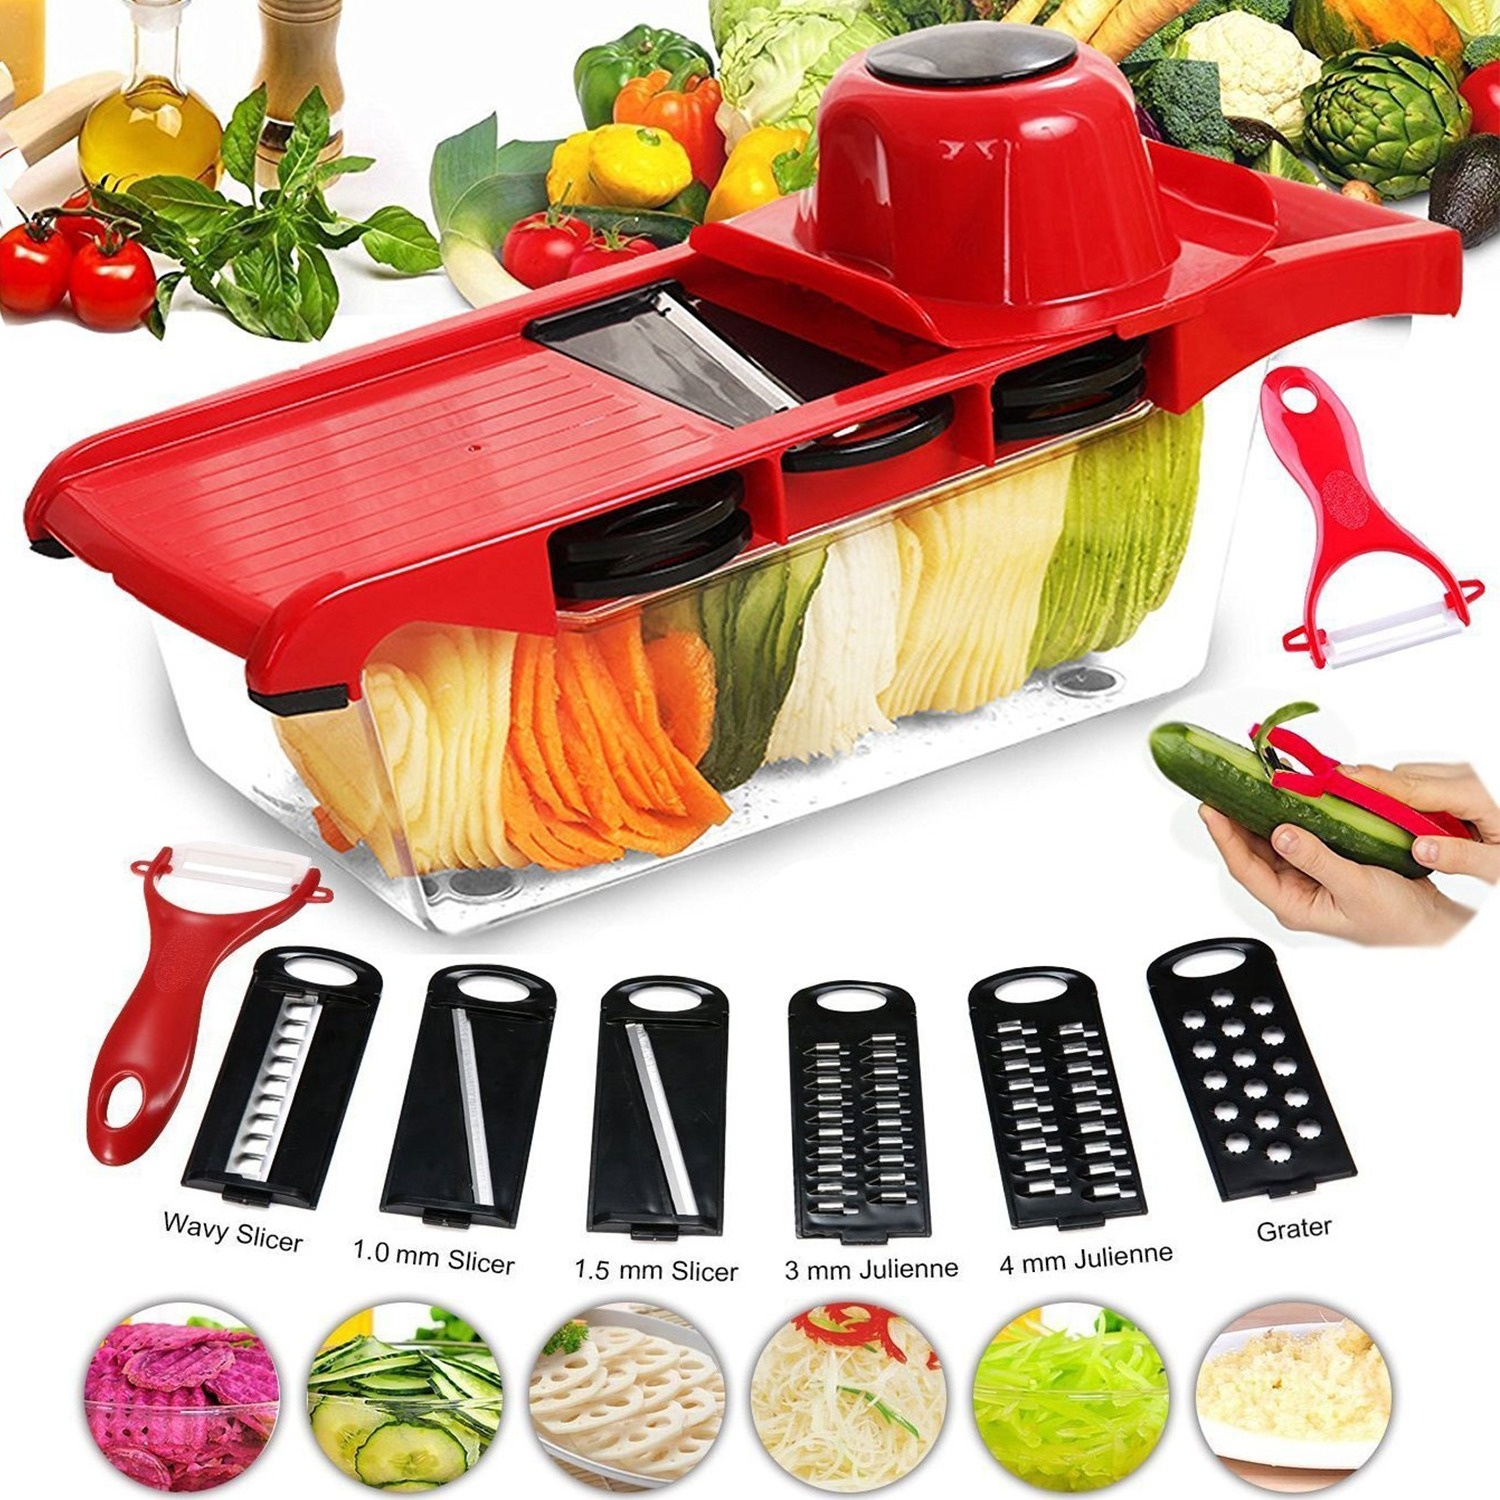 Vegetable slicer 2 mm thick slices with patented parabolic blade